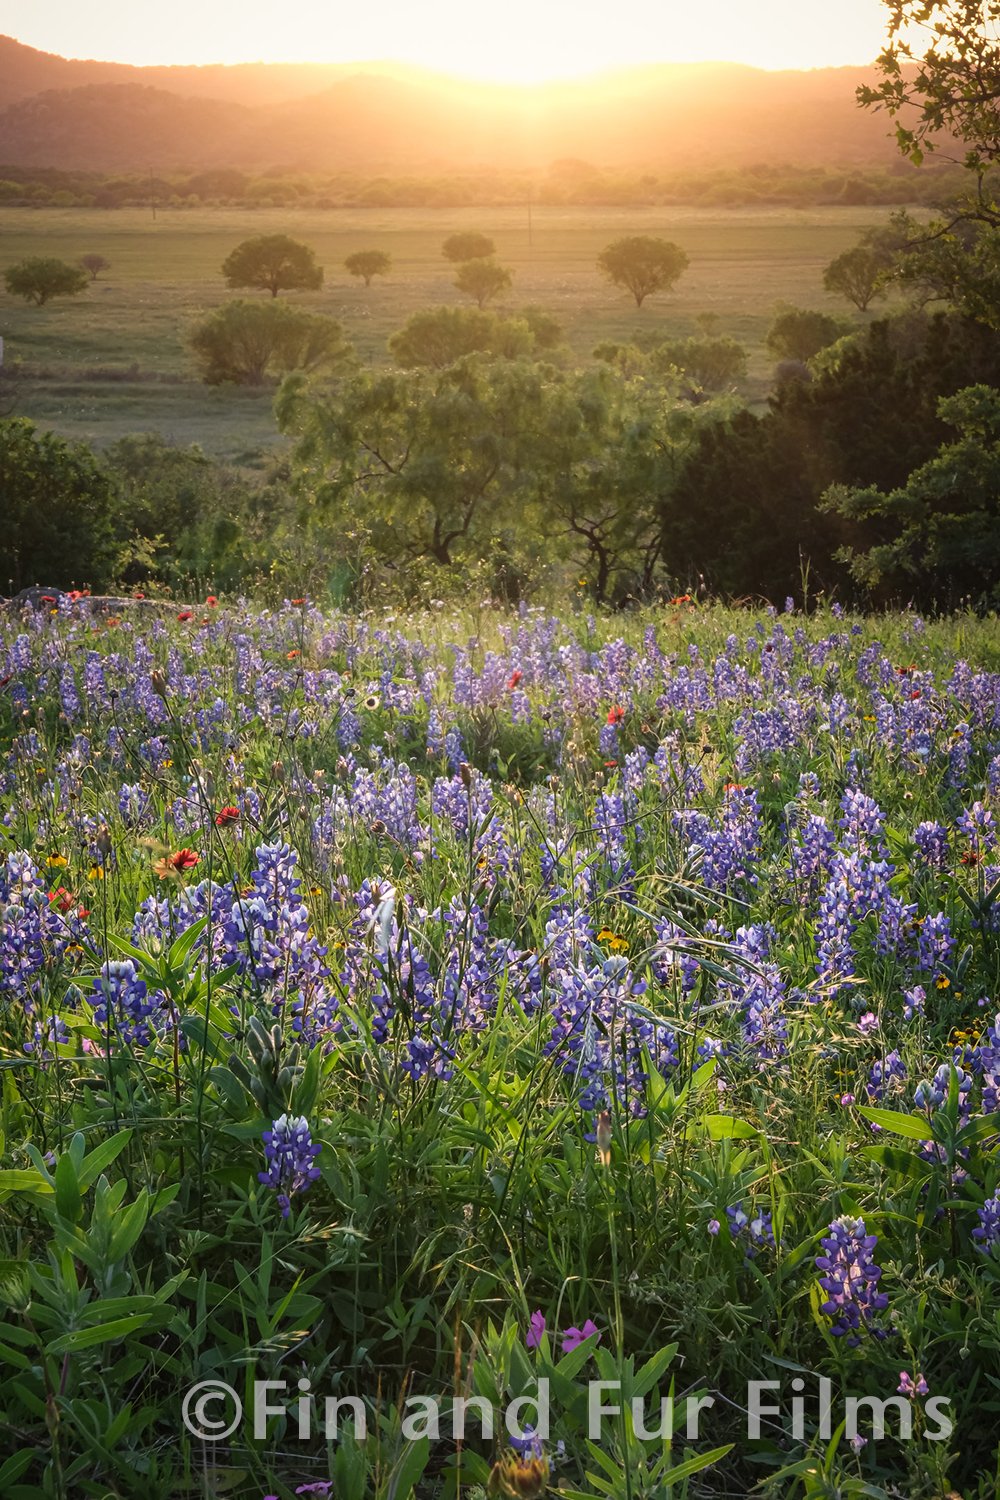 Fin and Fur Films_Central Texas Wildflowers copy.jpg